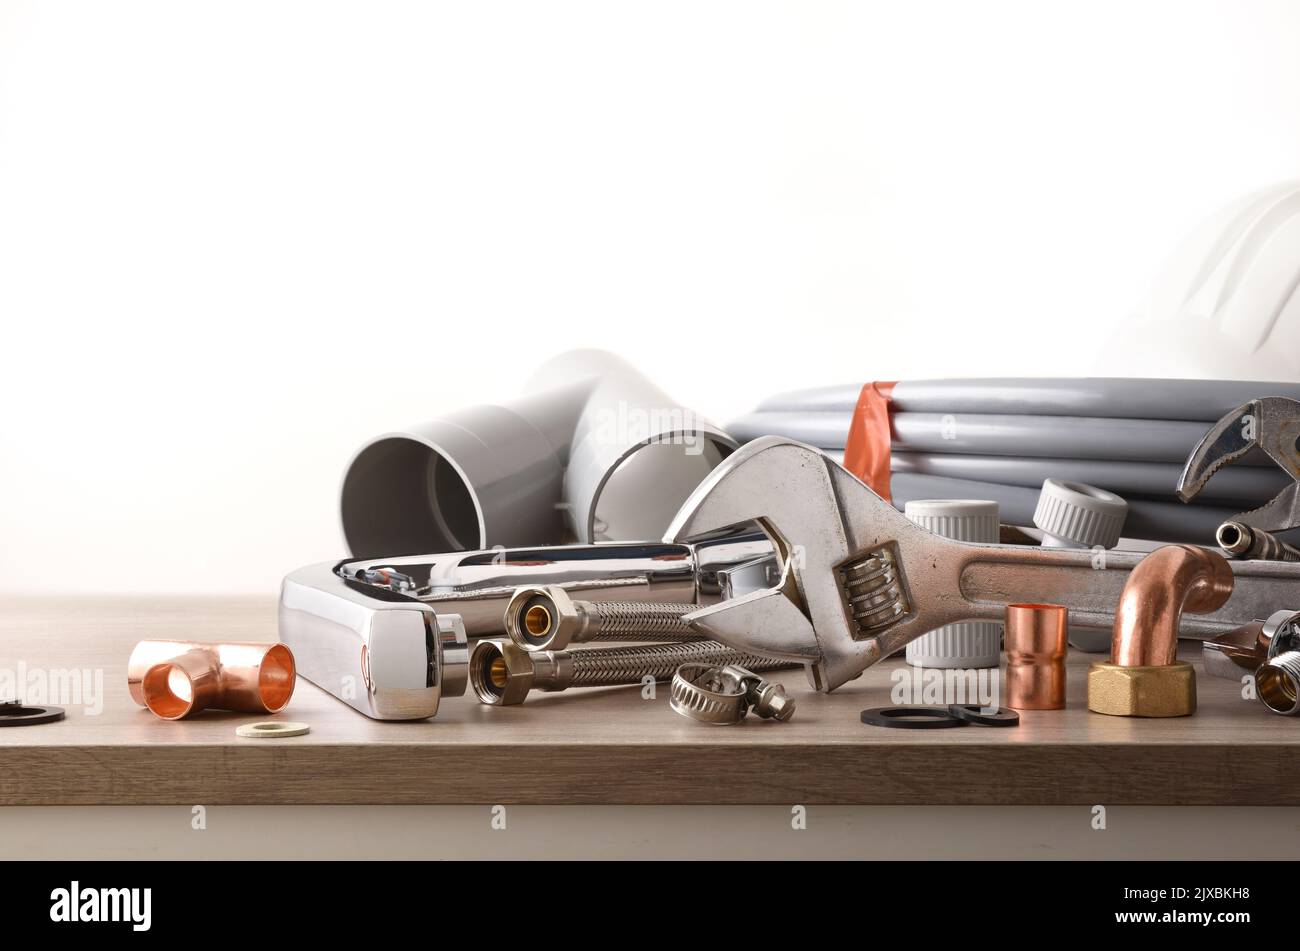 Plumbing material and tools on wooden bench and white isolated background. Front view. Horizontal composition. Stock Photo